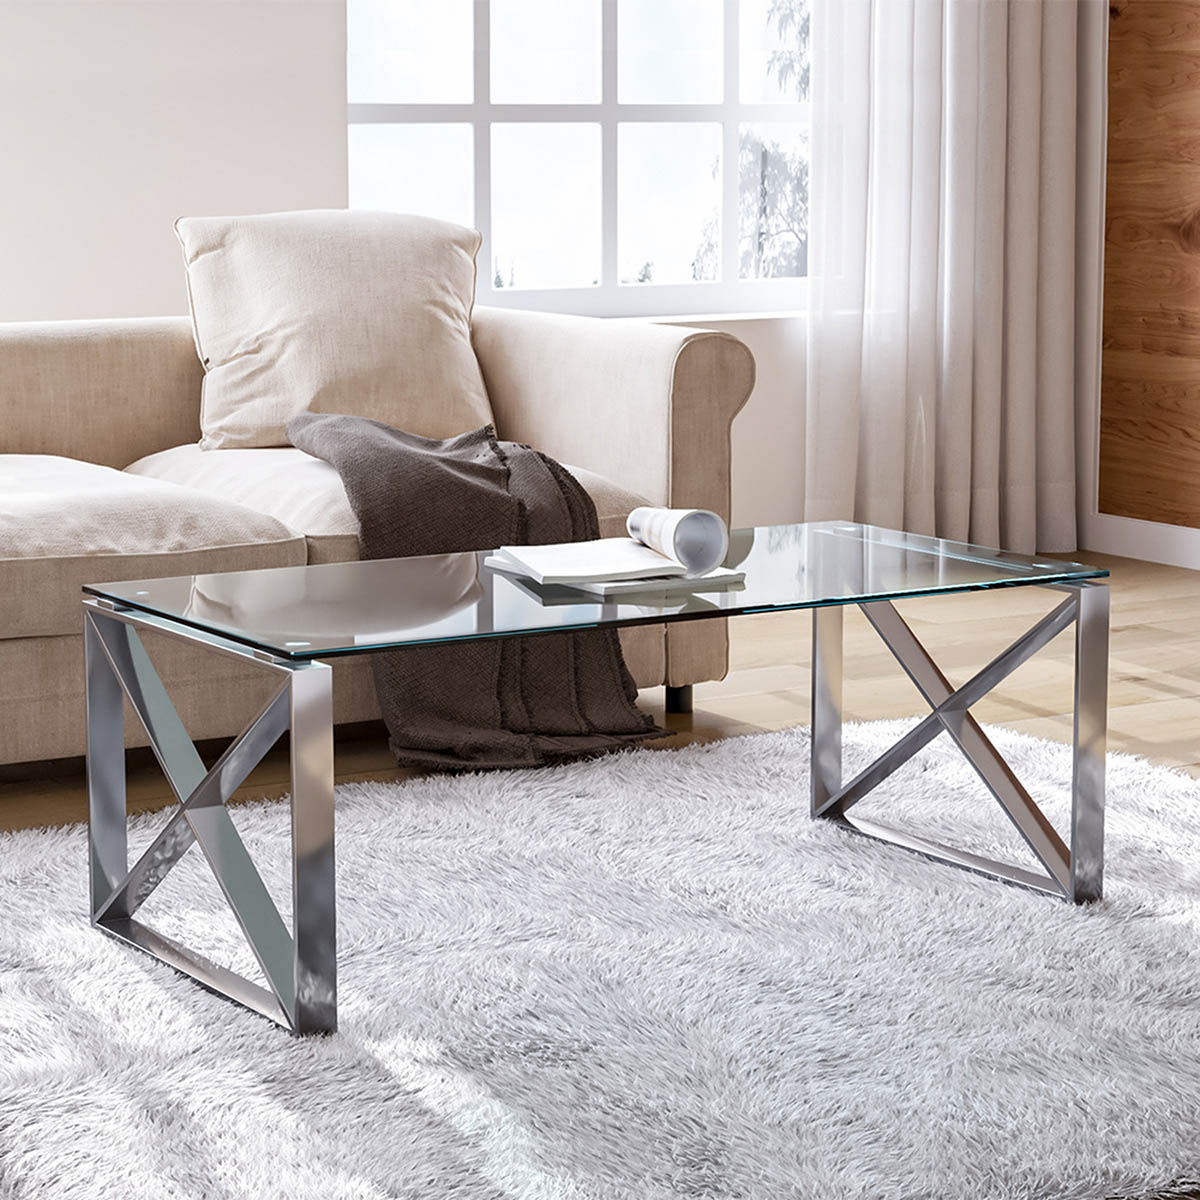 How To Build A Glass Top Coffee Table